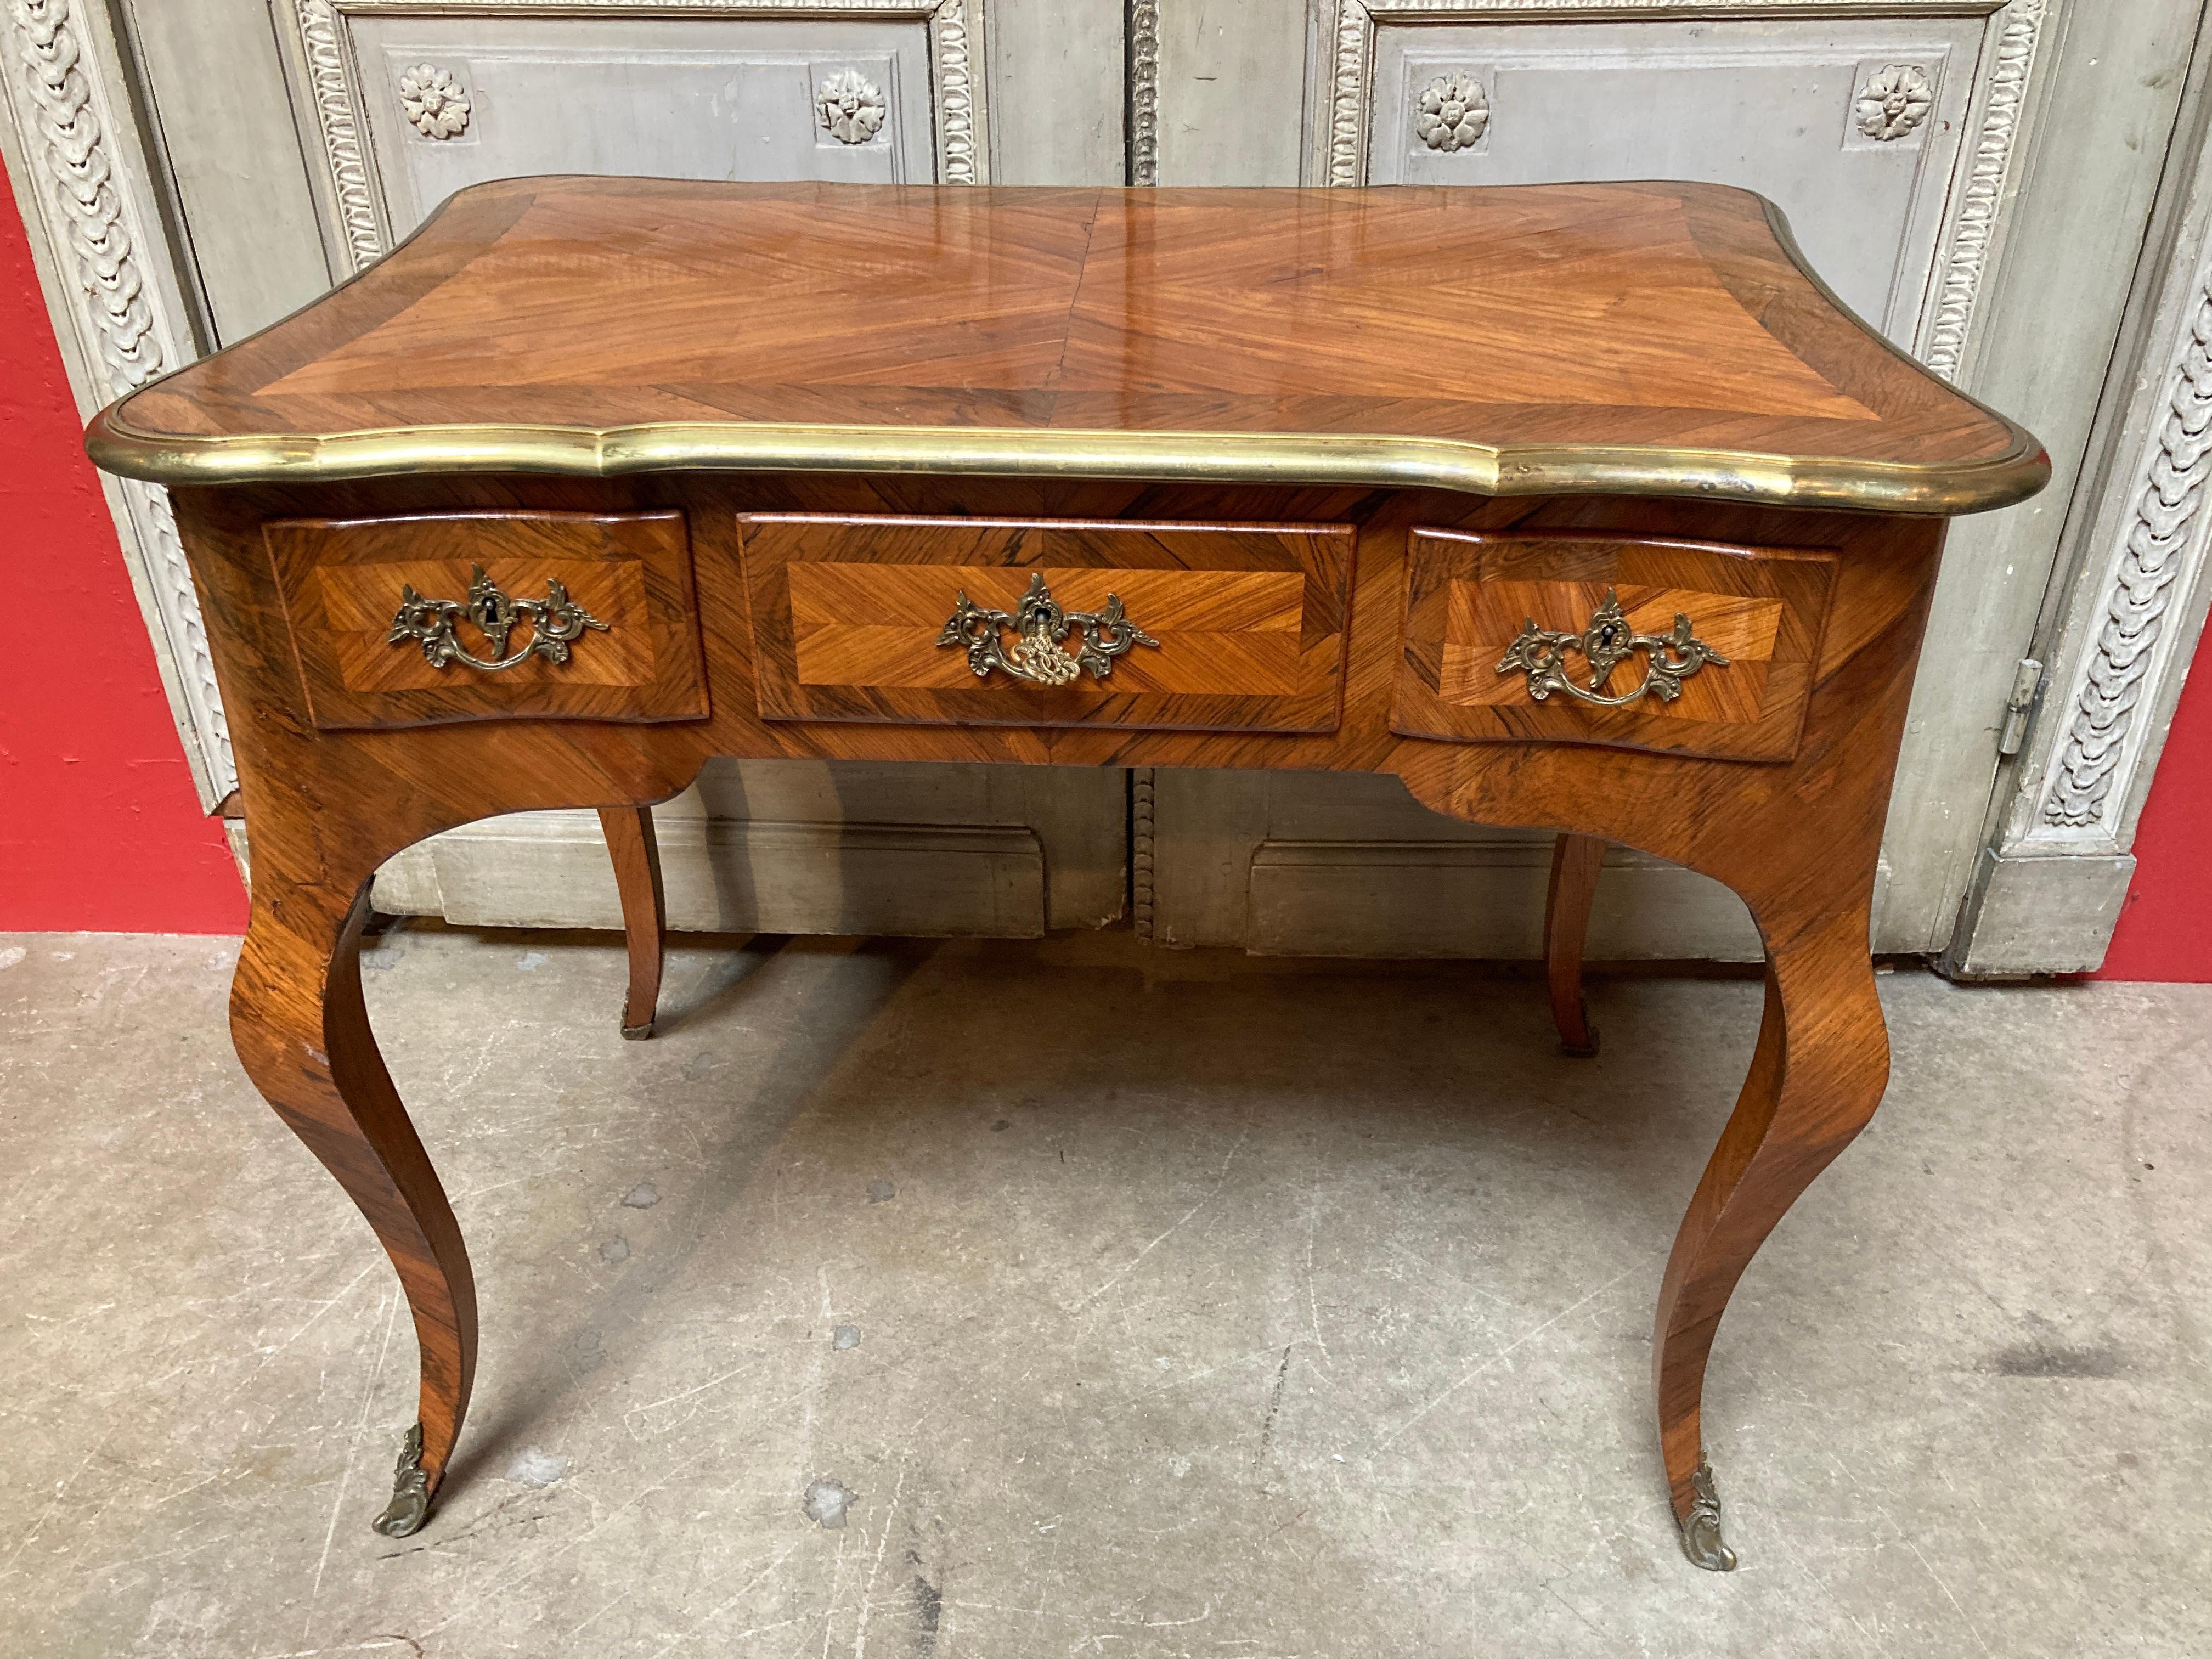 A 19th century French Louis XV style kingwood veneered parquetry writing table with bronze fittings.
The three drawer table is a wonderful small size and have a beautifully shaped top and cabriole legs.
This table was originally created as a